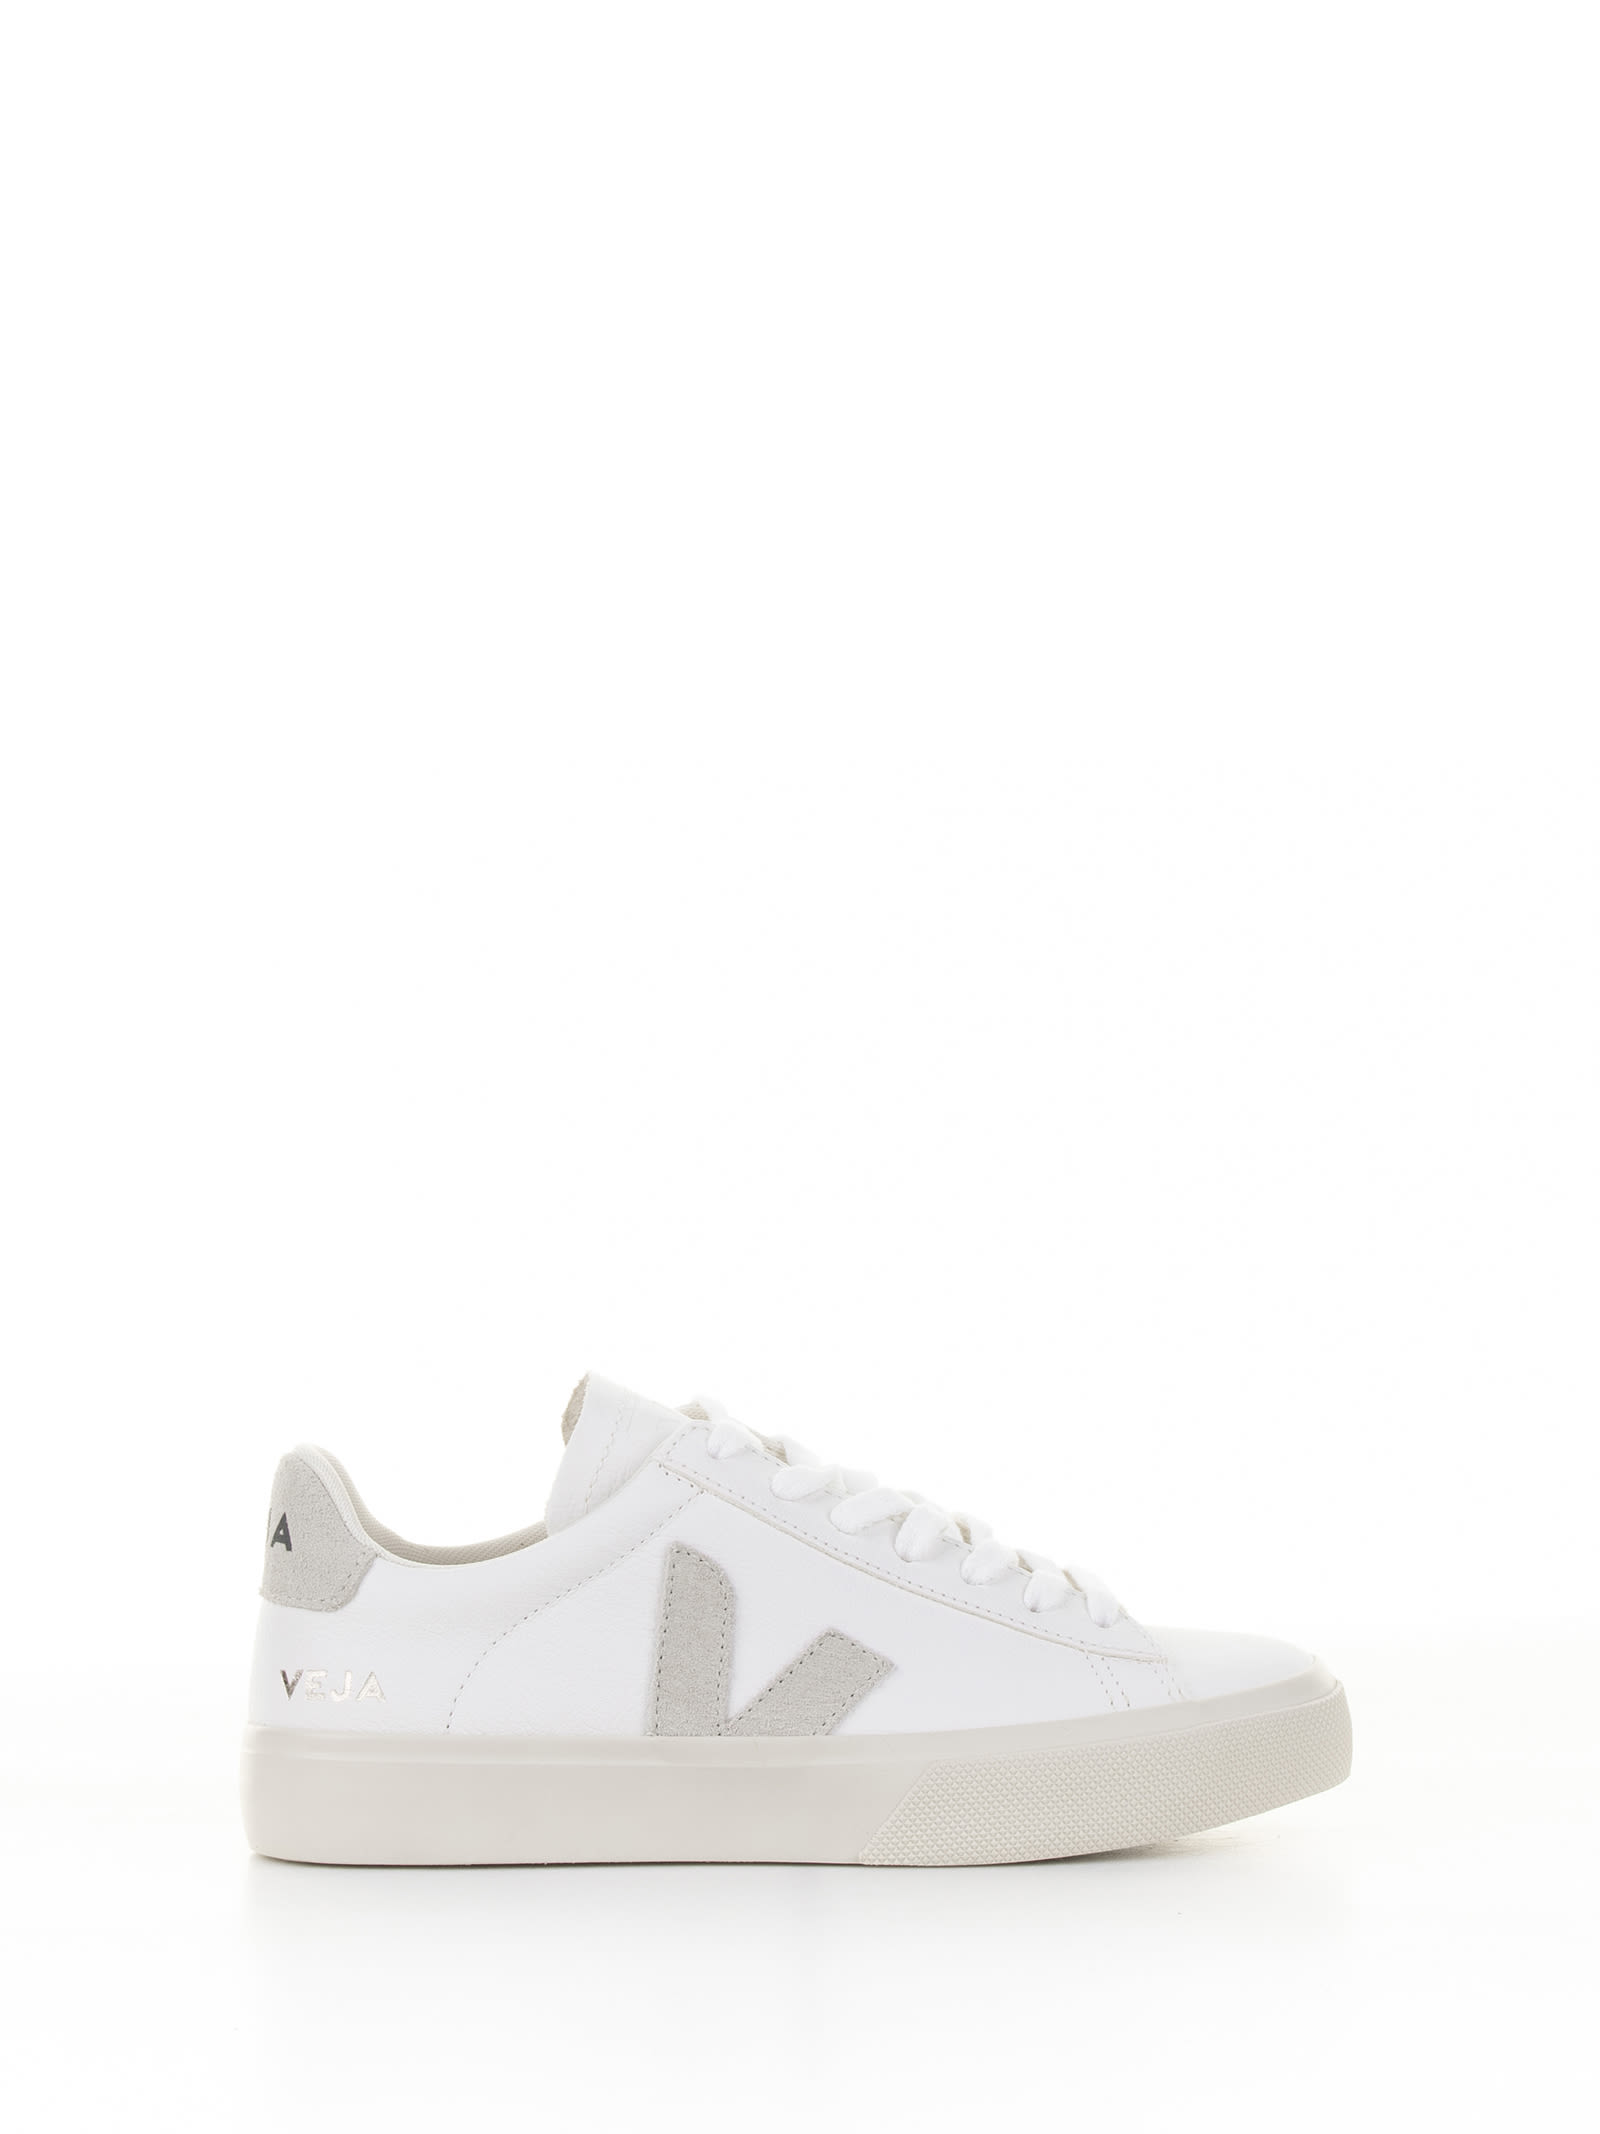 Veja Campo Sneaker In White Gray Leather For Women